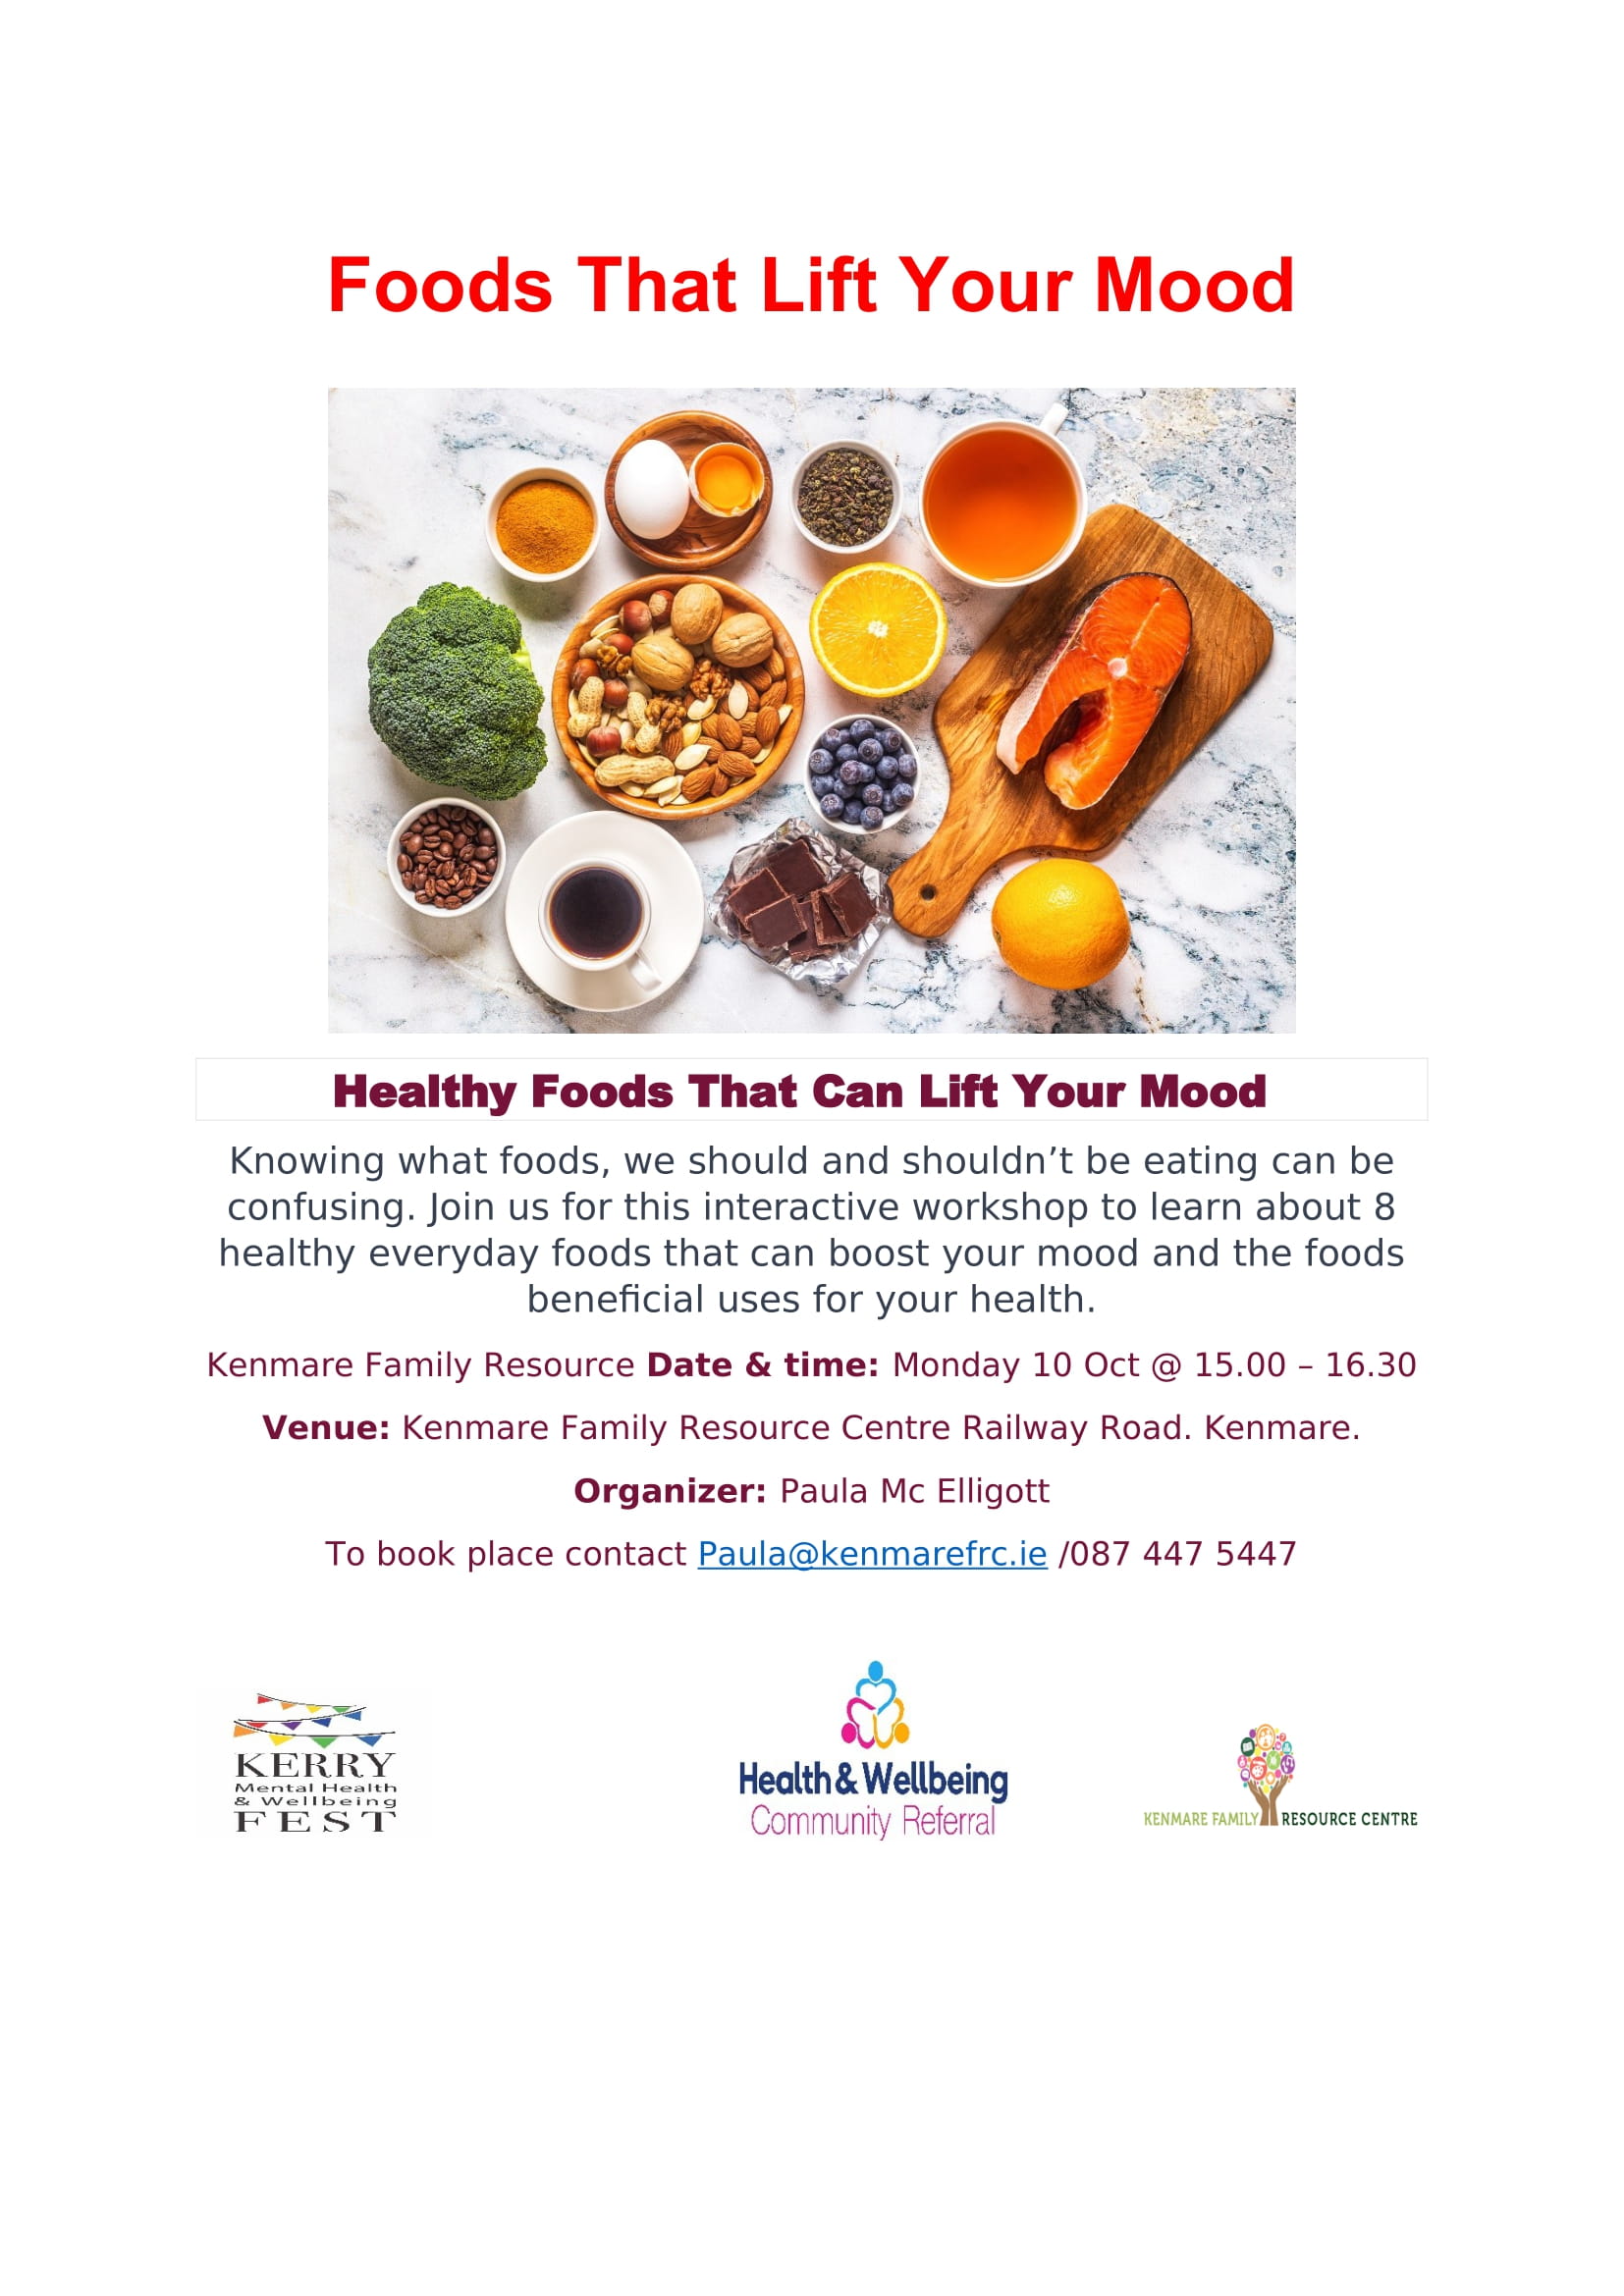 Healthy Foods That Can Lift Your Mood event at Kerry Mental Health & Wellbeing Fest 2022